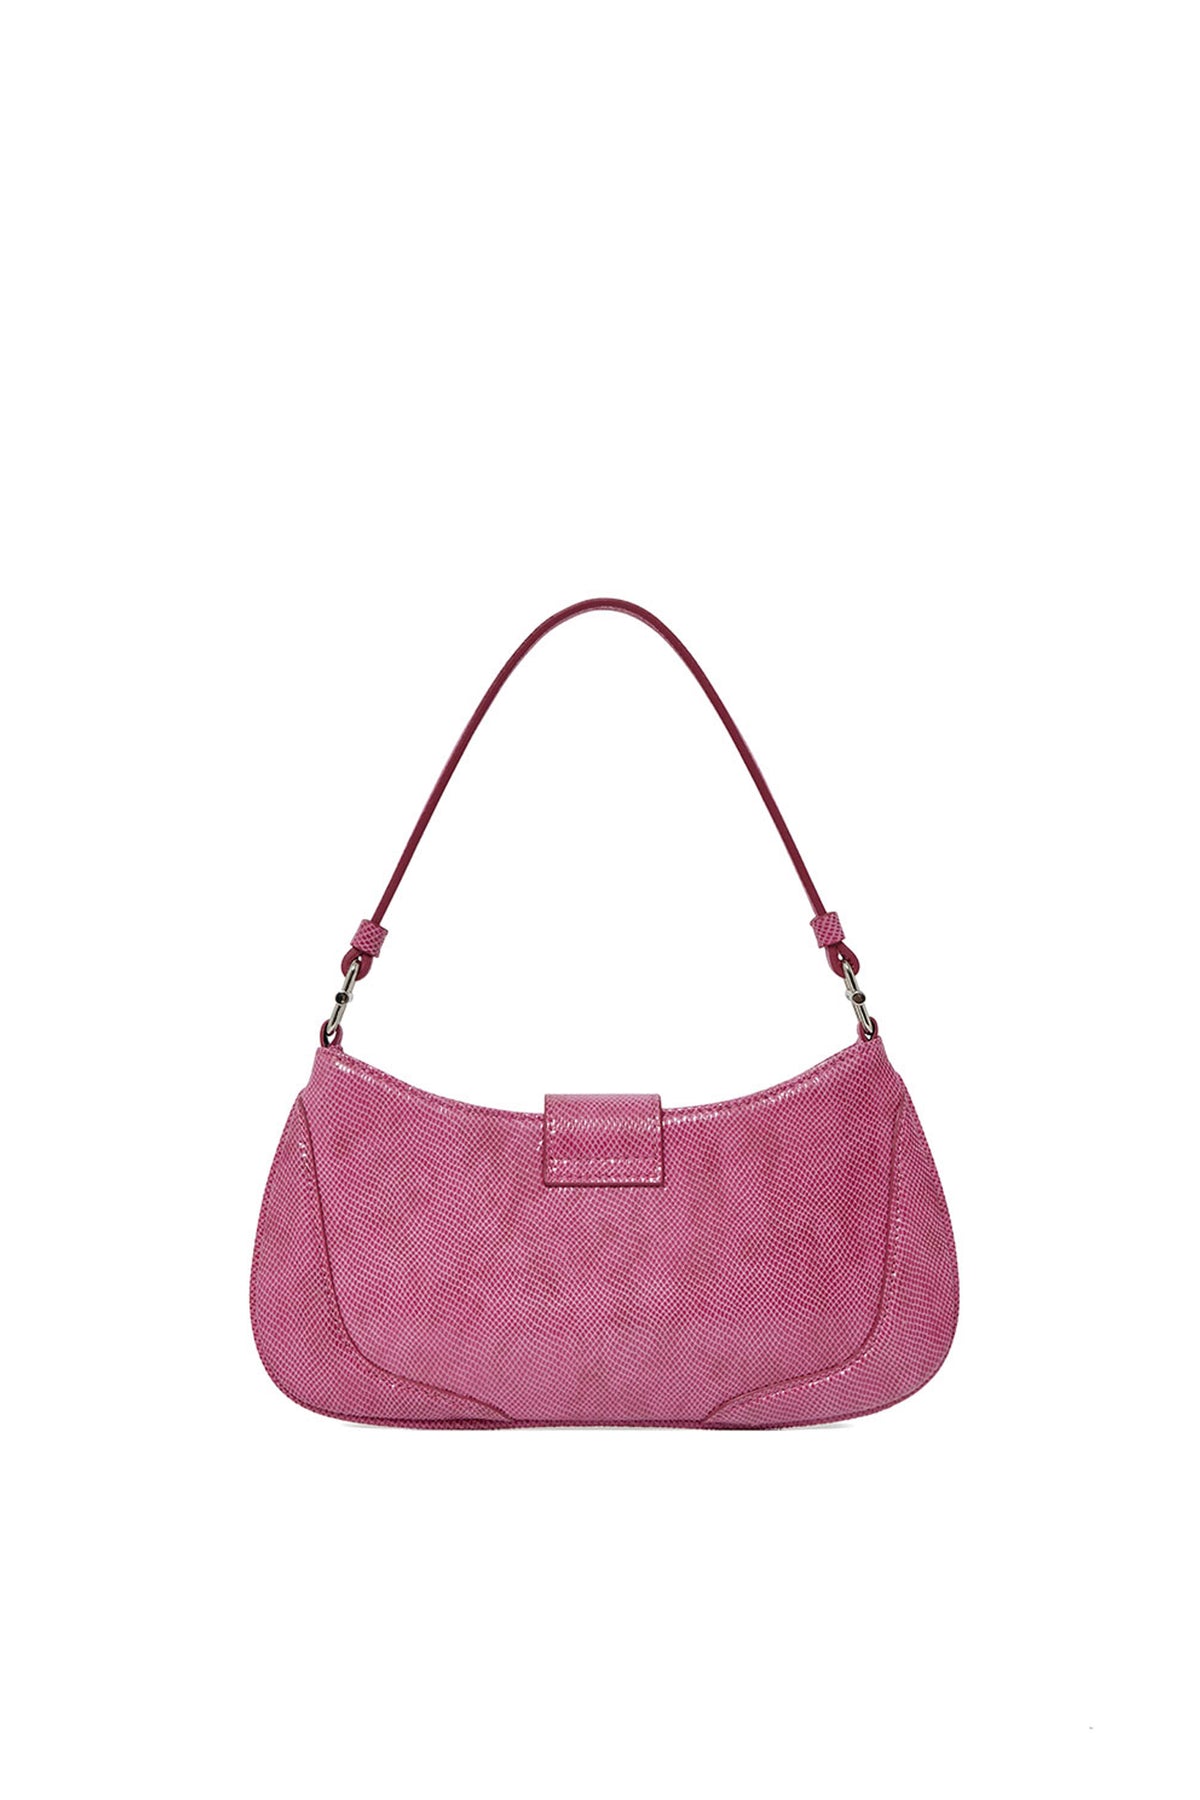 SHOULDER BROCLE SMALL / CLOUD FUCHSIA PINK